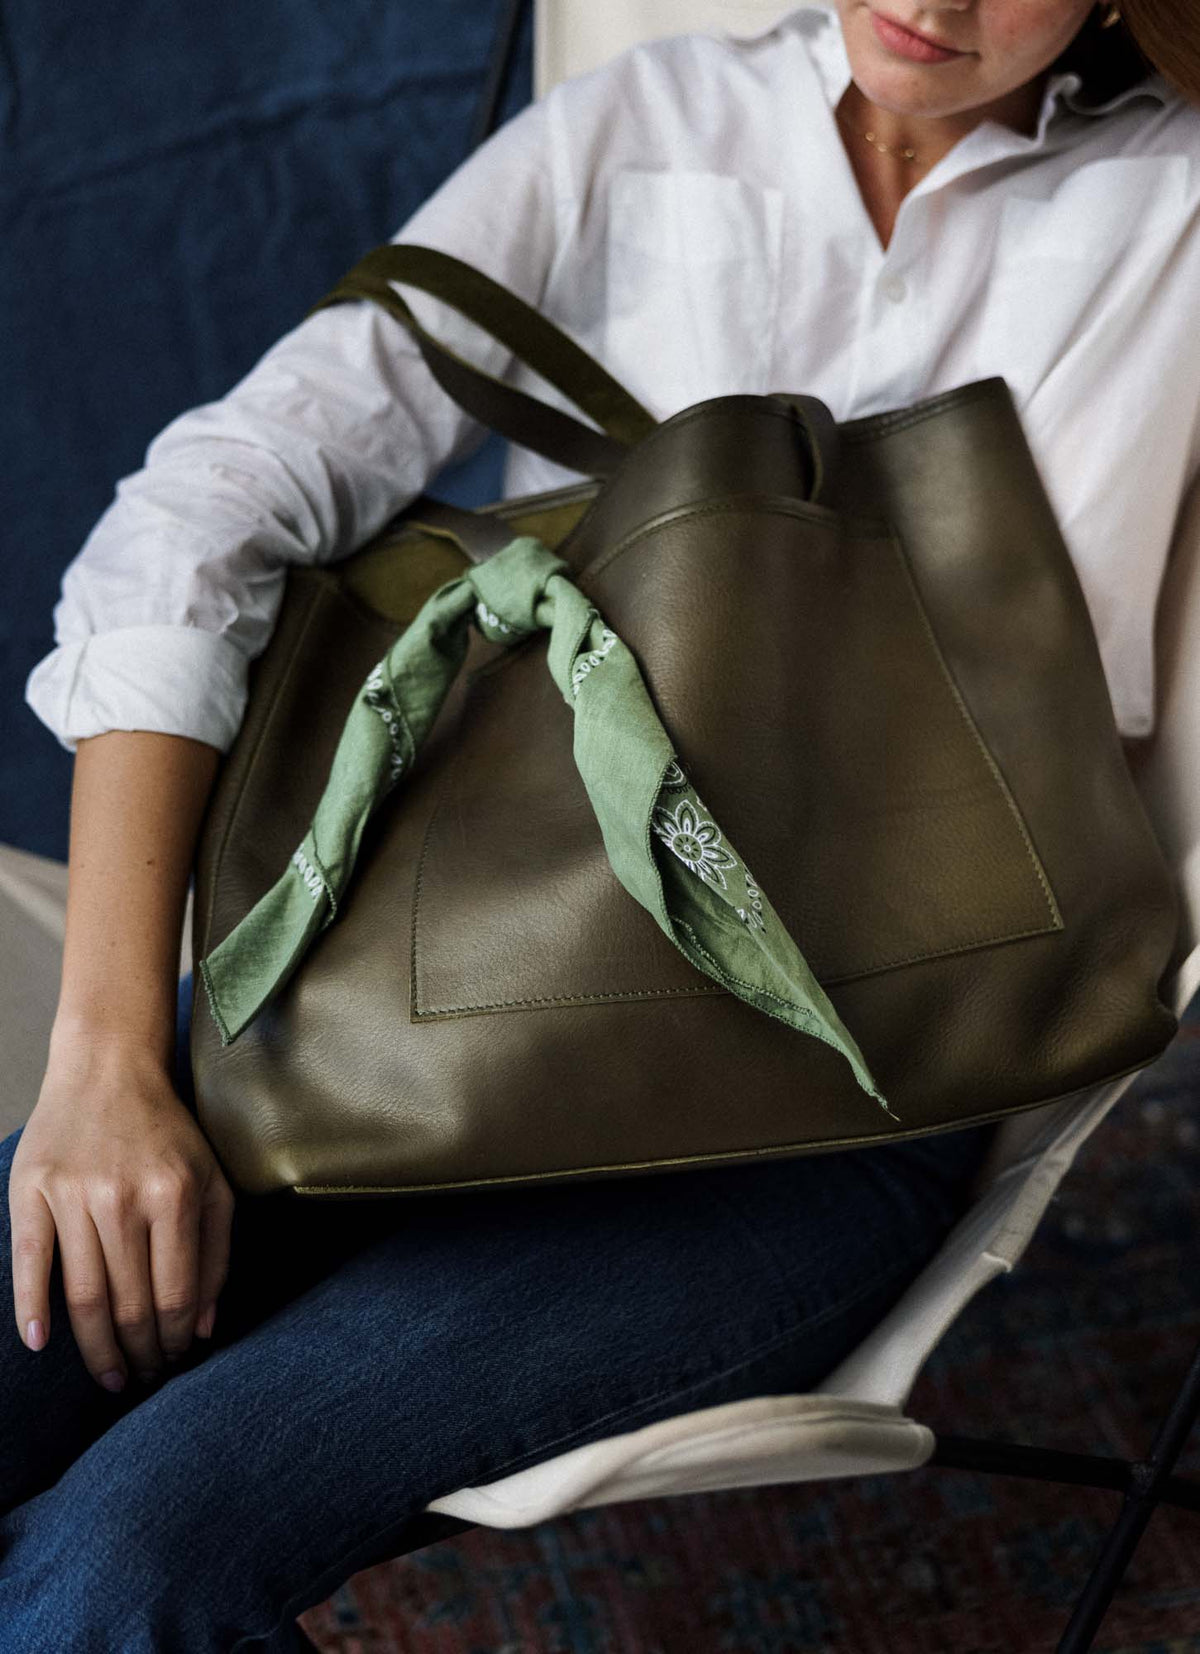 The Oversized Leather Tote by WP Standard - Cobbler Union